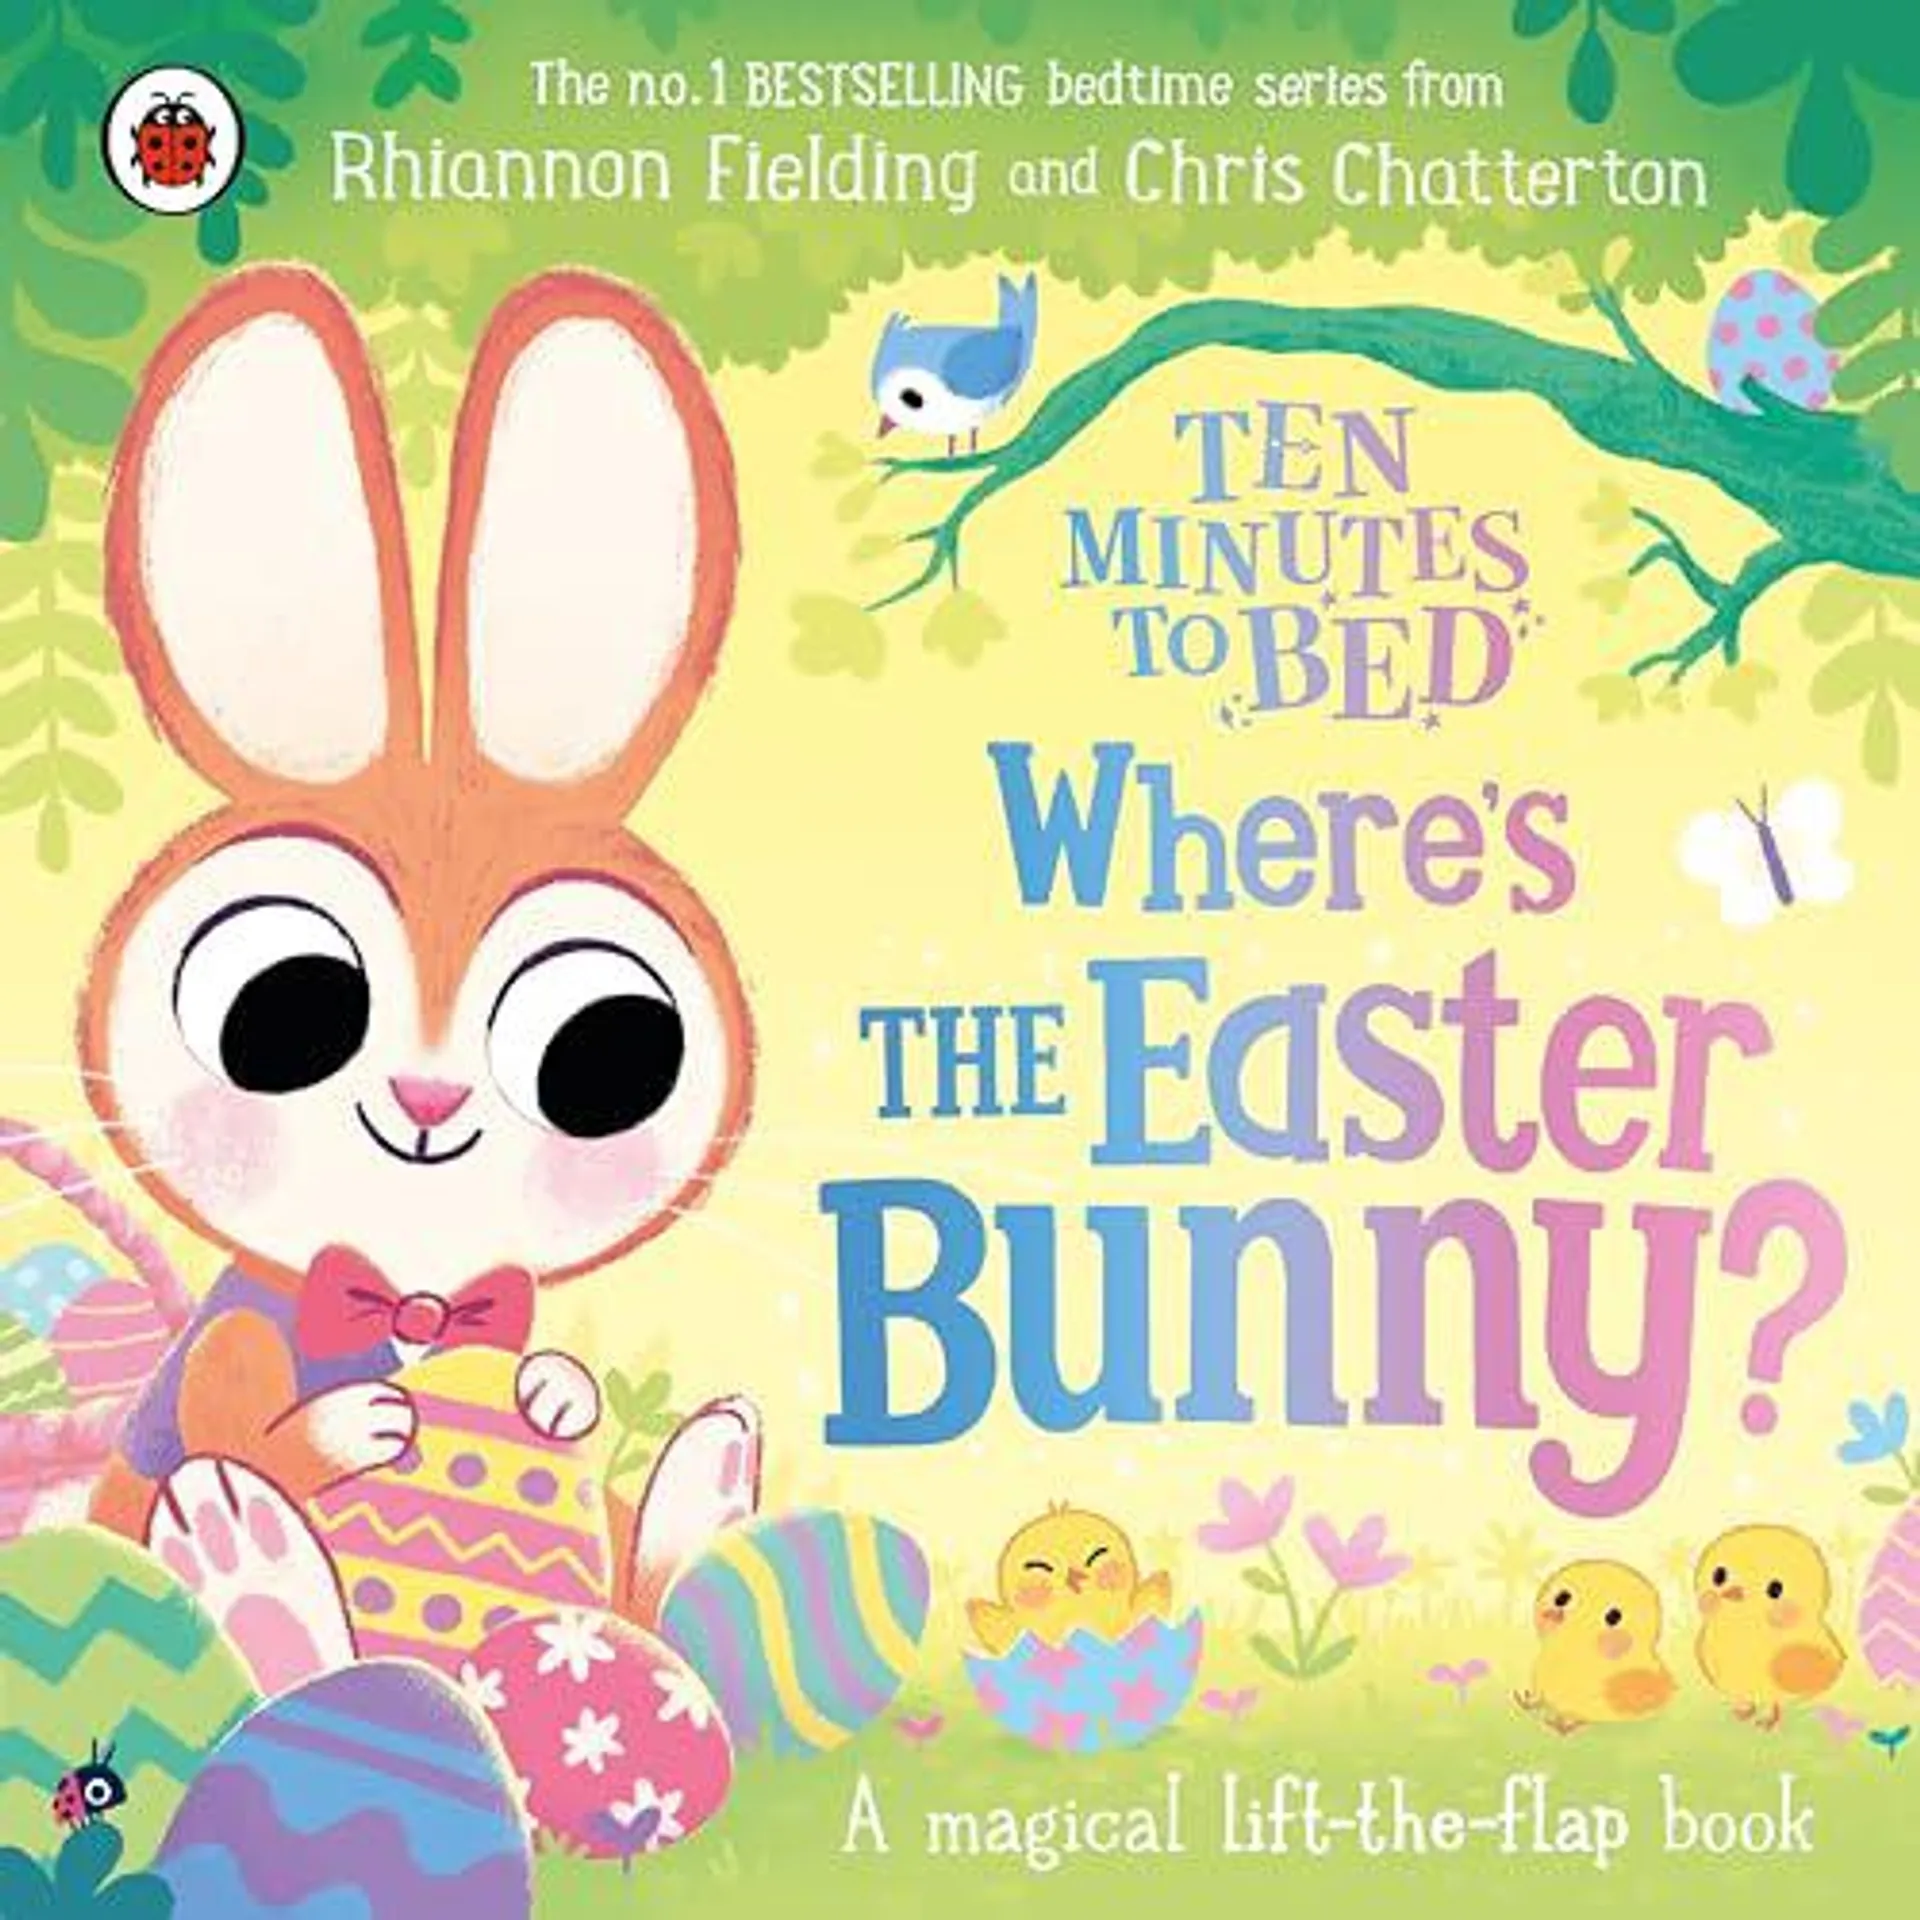 Ten Minutes to Bed: Where's the Easter Bunny? by Rhiannon Fielding